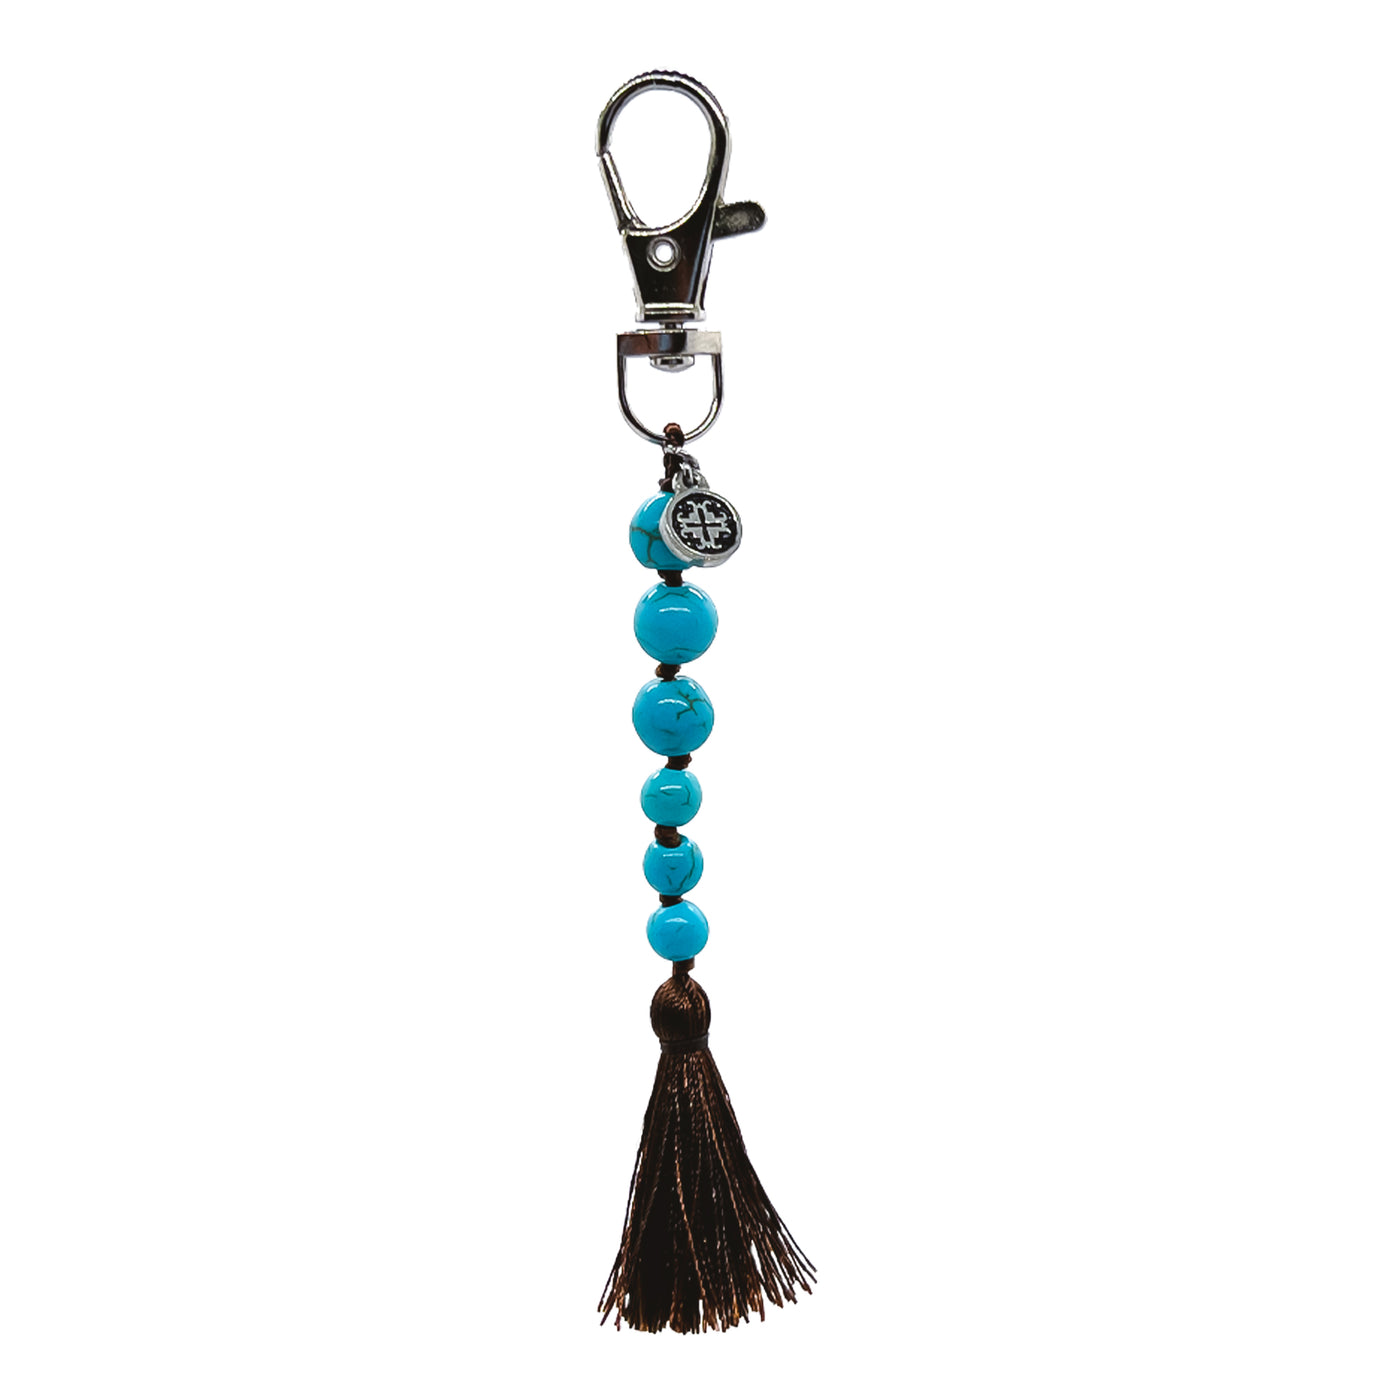 TRANQUILITY: Howlite Turquoise Bag Charm